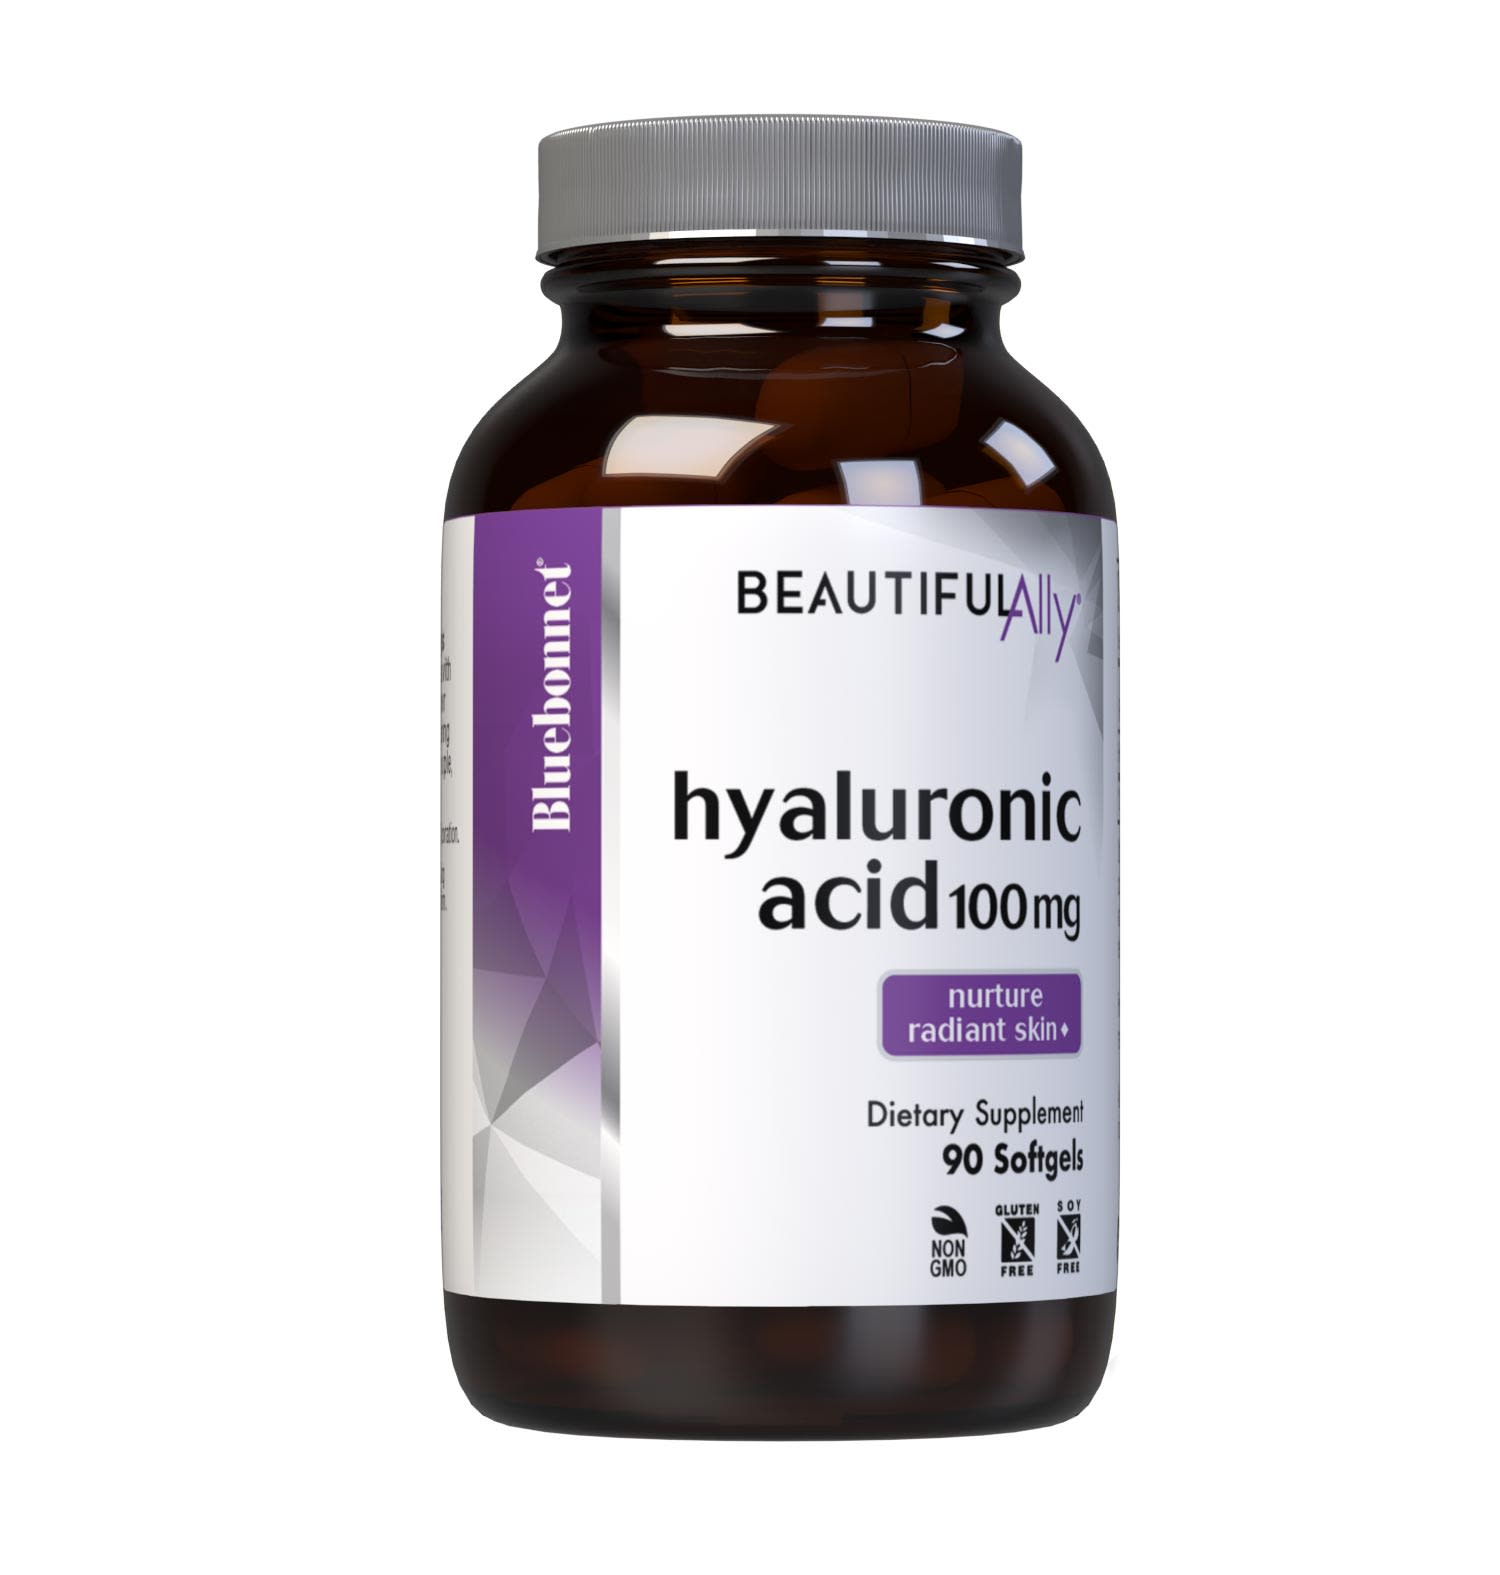 Bluebonnet’s Beautiful Ally Hyaluronic Acid 100 mg 90 Softgels are specially formulated to help increase skin hydration and repair with vegan-sourced hyaluronic acid in a base of non-GMO sunflower oil. Hyaluronic acid serves as a cushion and lubricant with the skin tp help create a more supple, luminescent, youthful appearance. #size_90 count